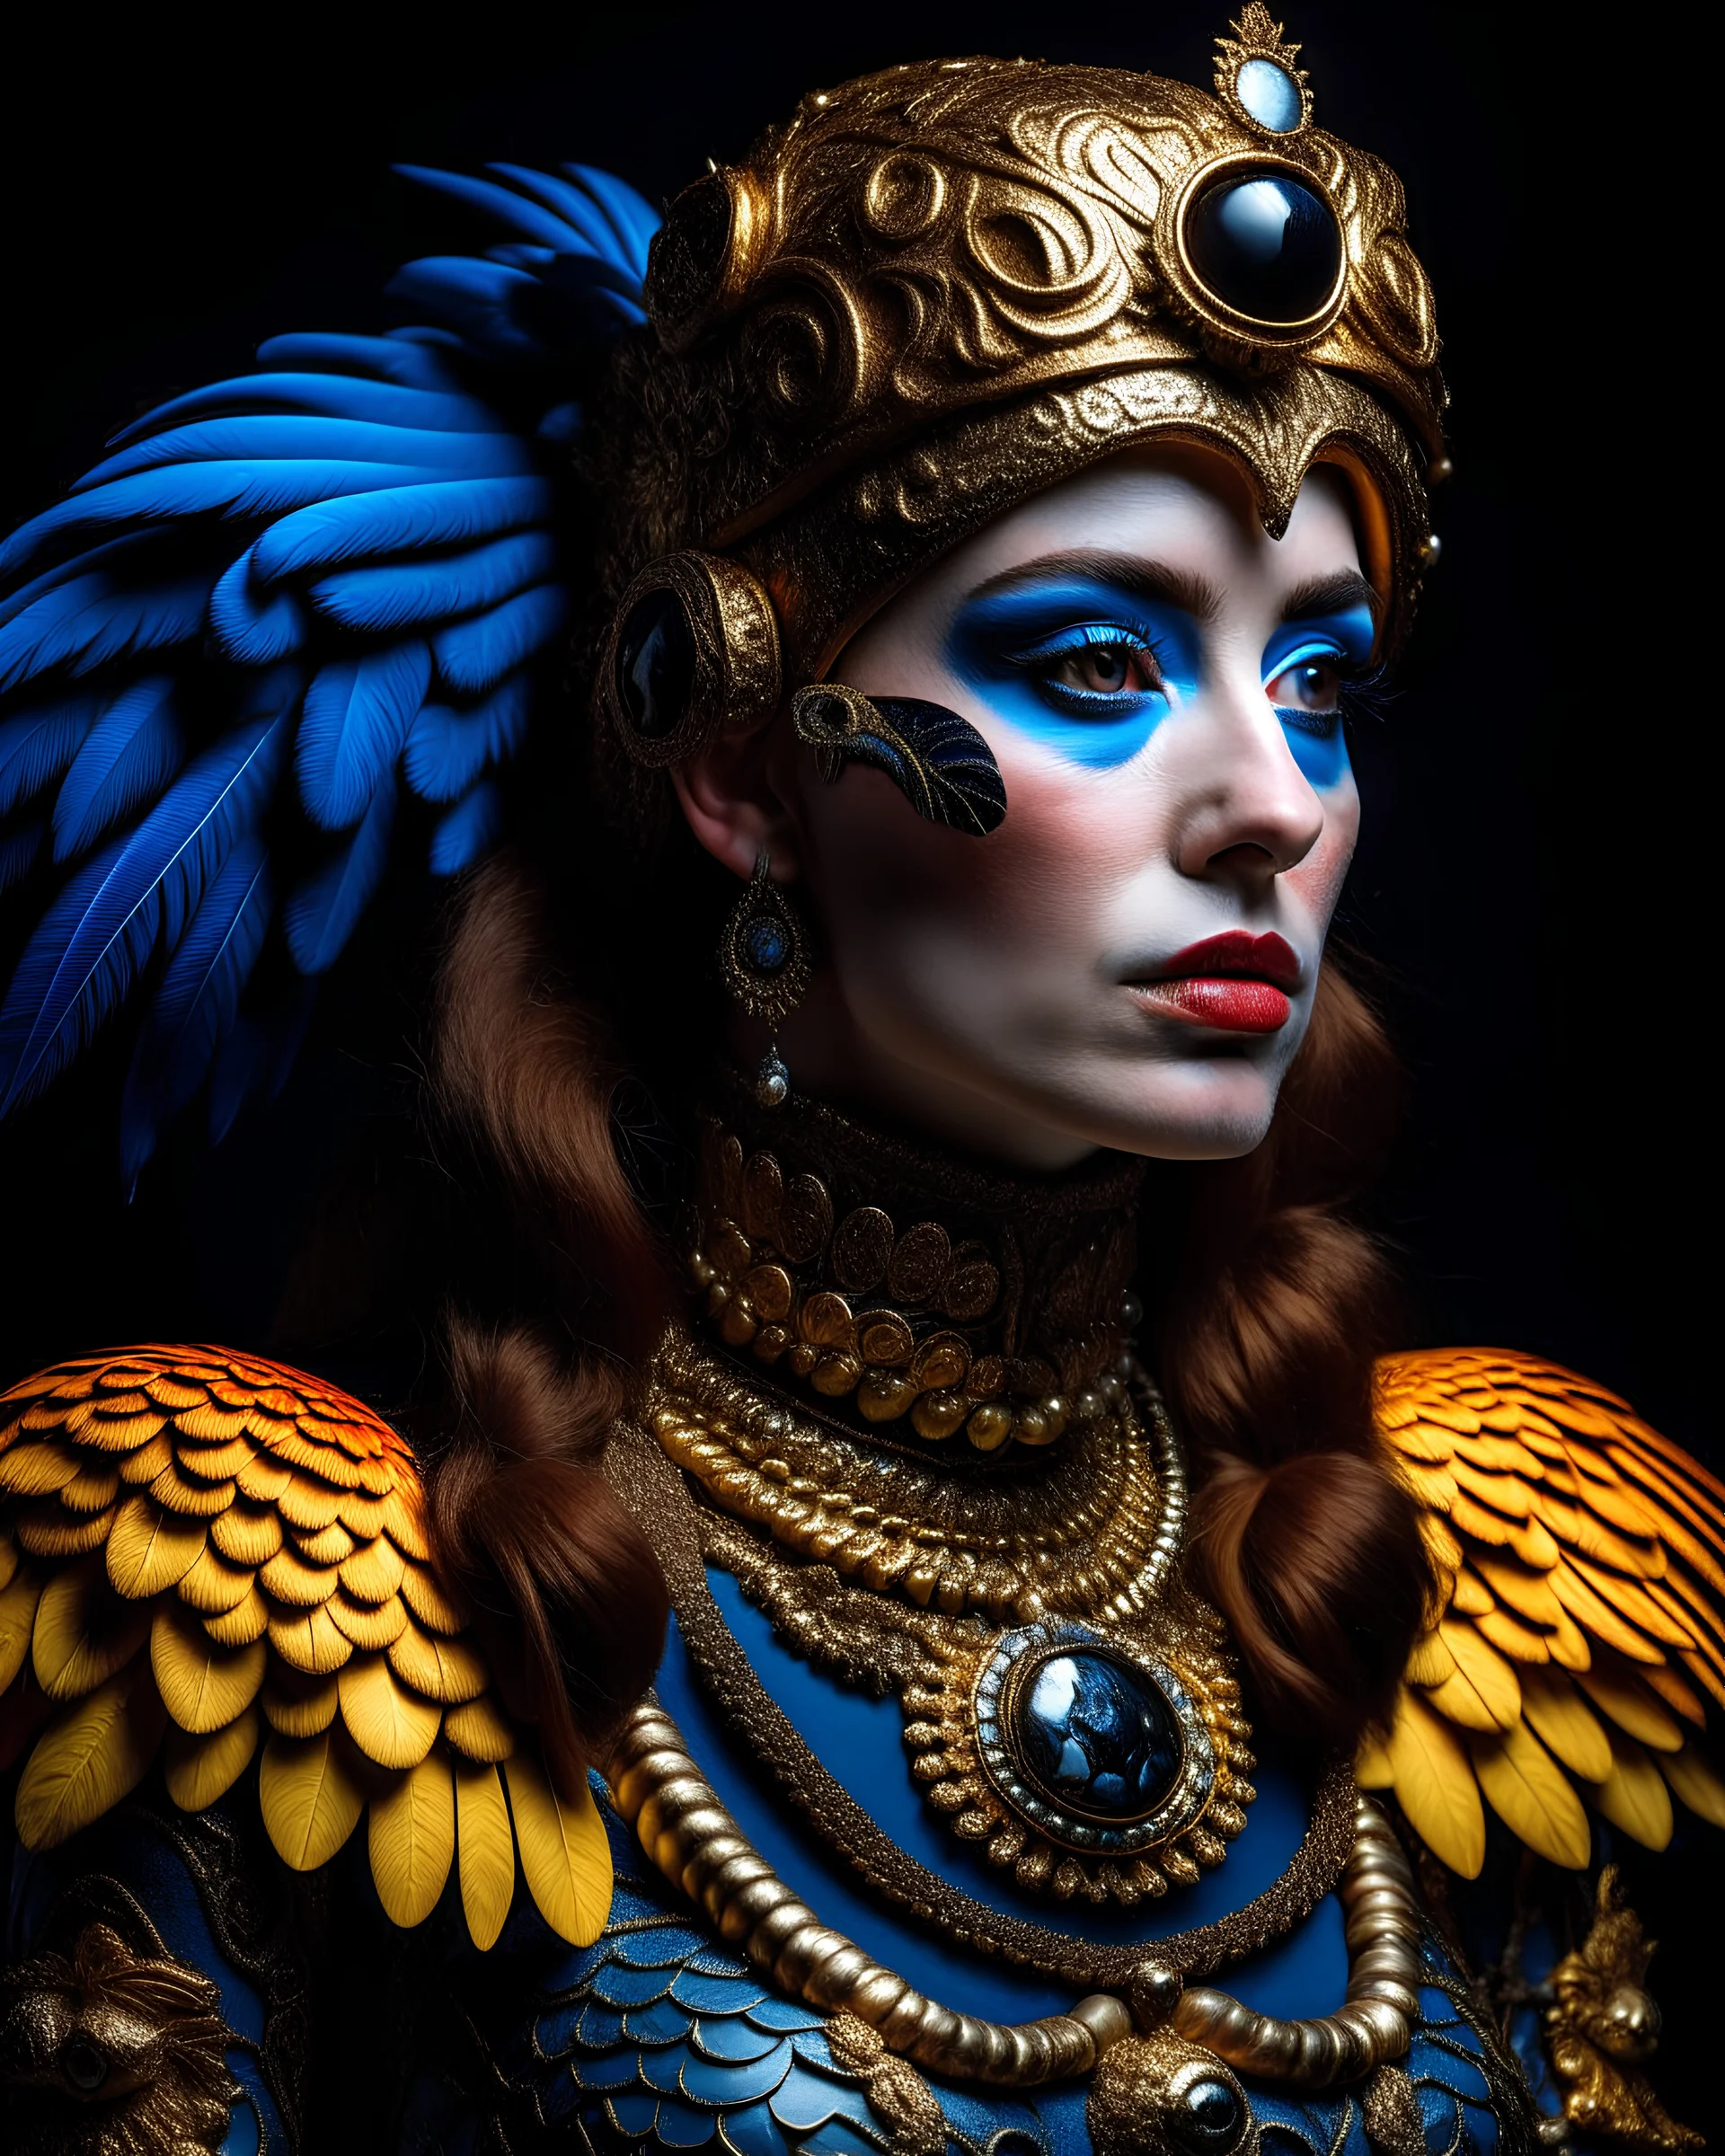 Beautiful macaws animal haddressed woman portrait adorned with metallic filigree decadent voidcore shamanism costume armour and headress decadent gothic maljsian style organic bio spinal ribbed detail of extremely detailed maximálist hyperrealistic portrait art